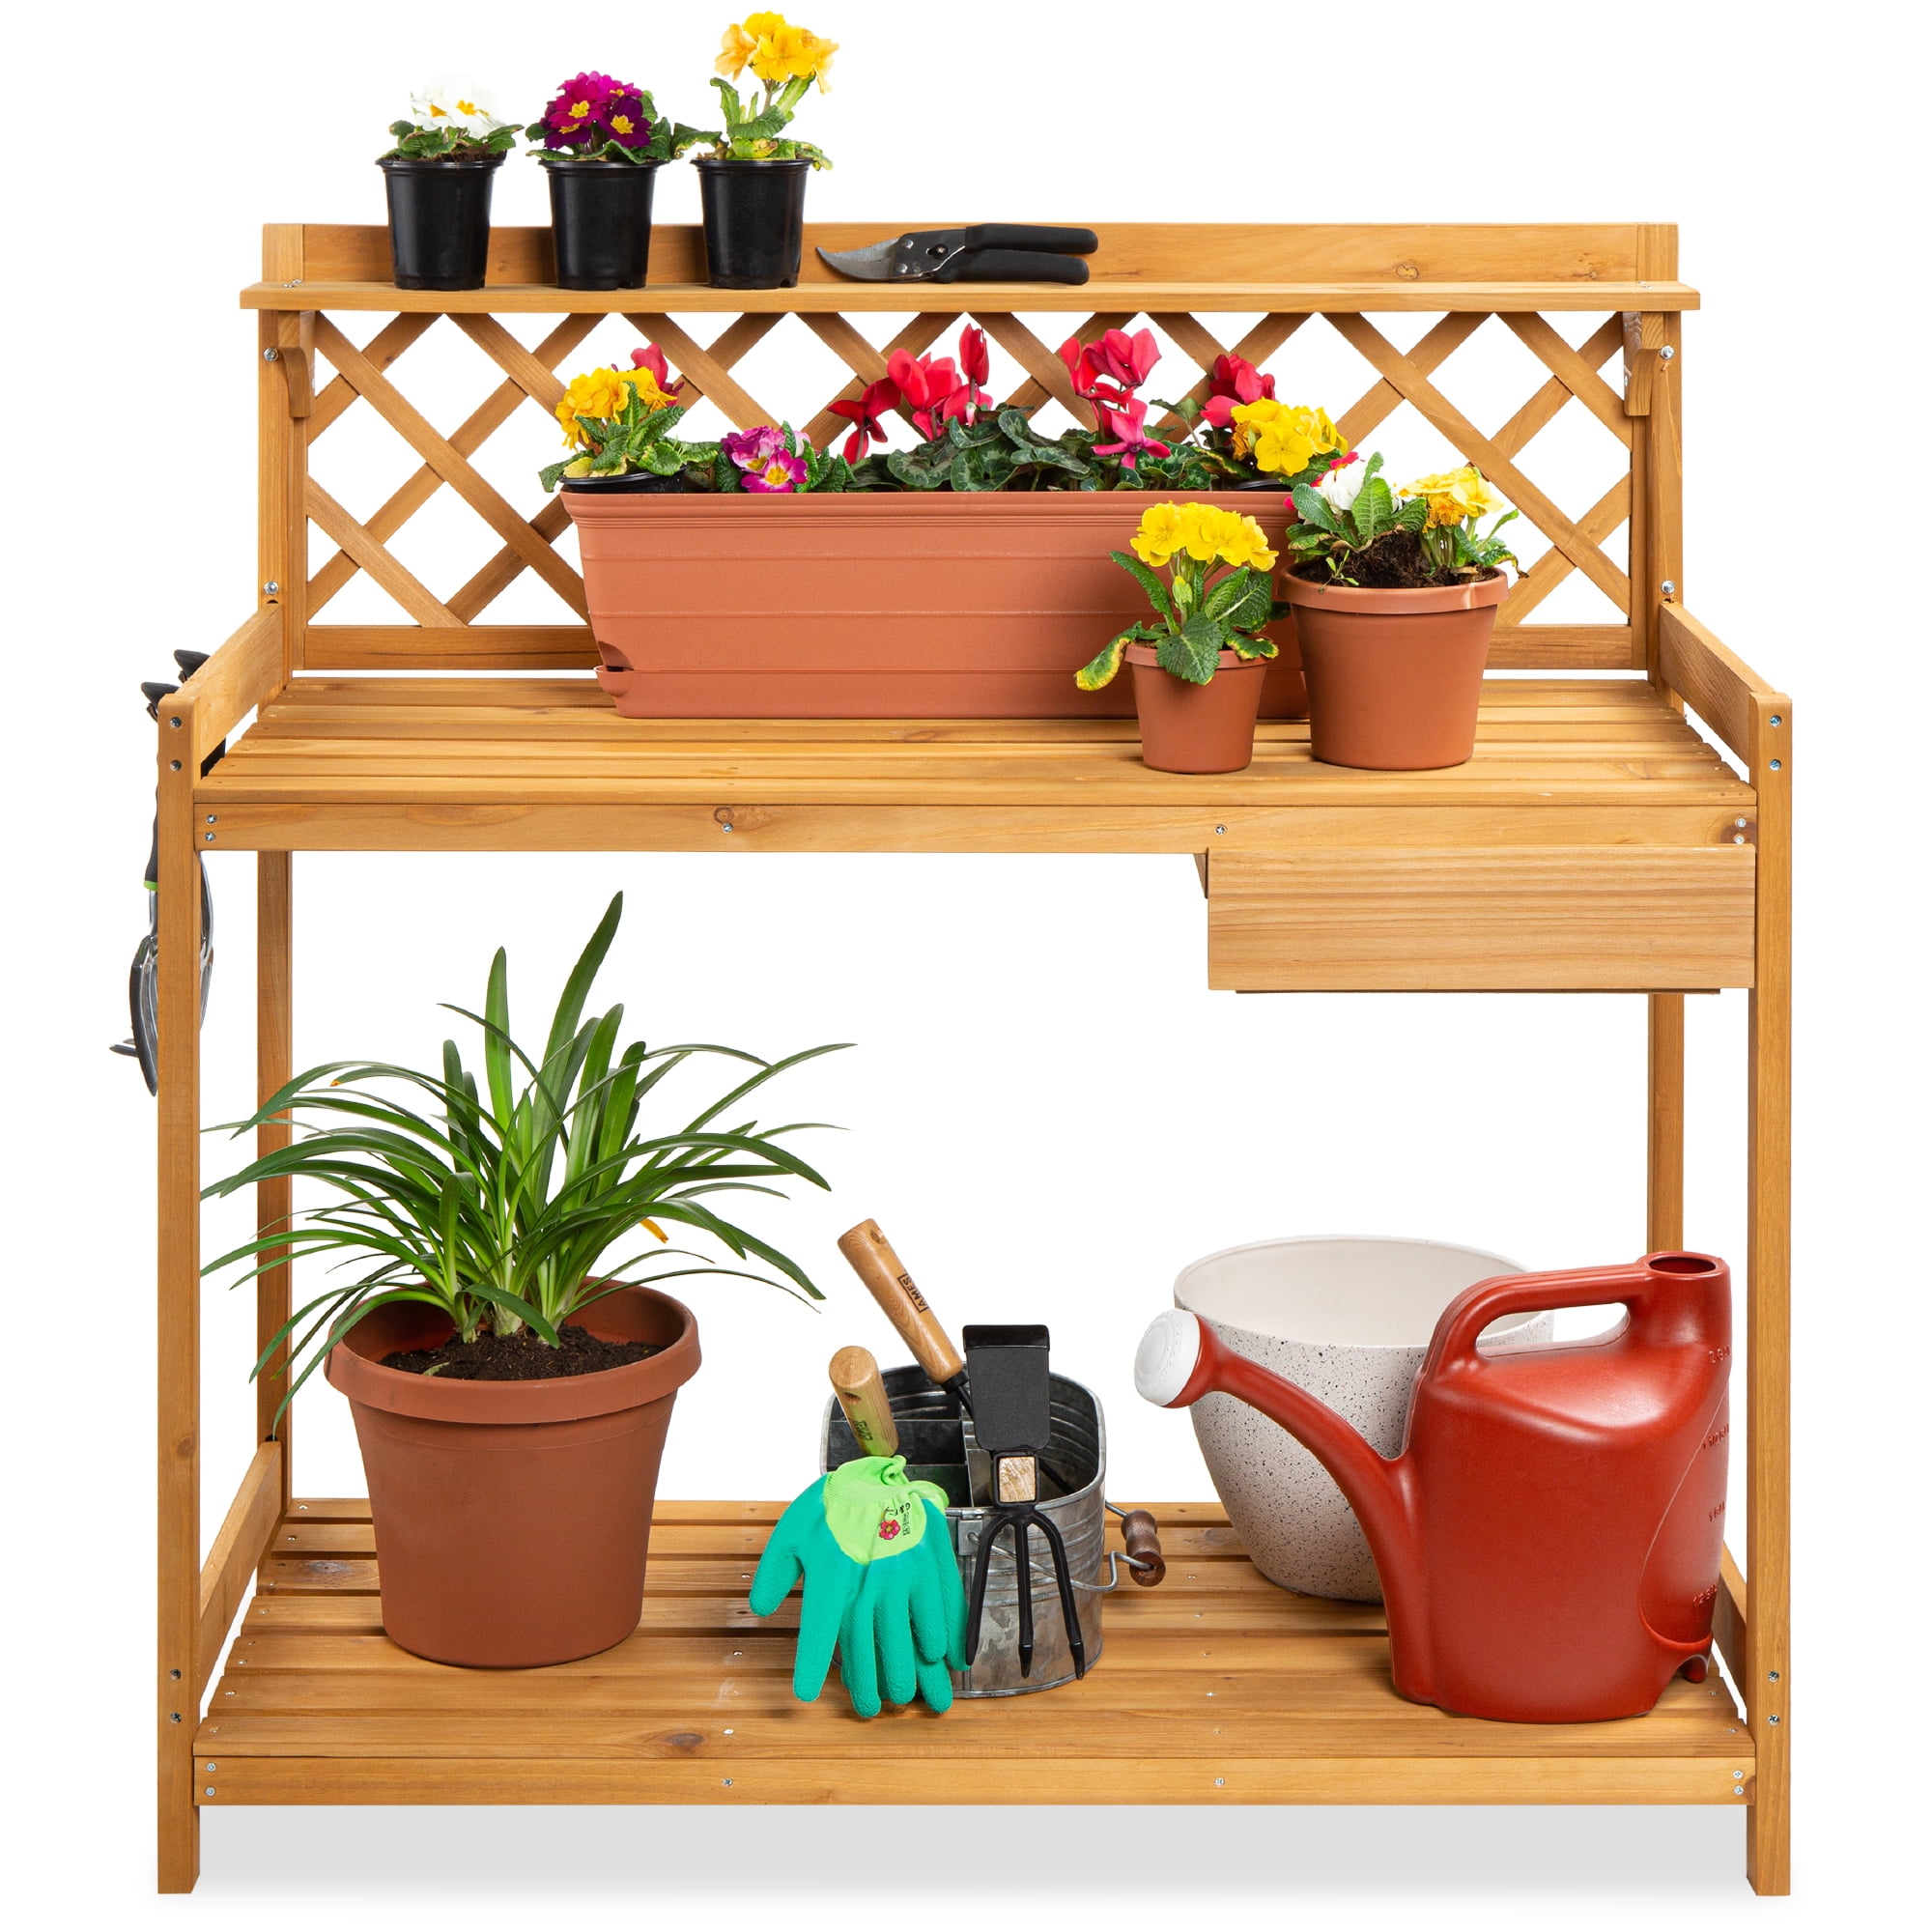 Outdoor Garden Wooden Planting Potting Cabinet Bench Table W/ Drawer Shelves Hot 